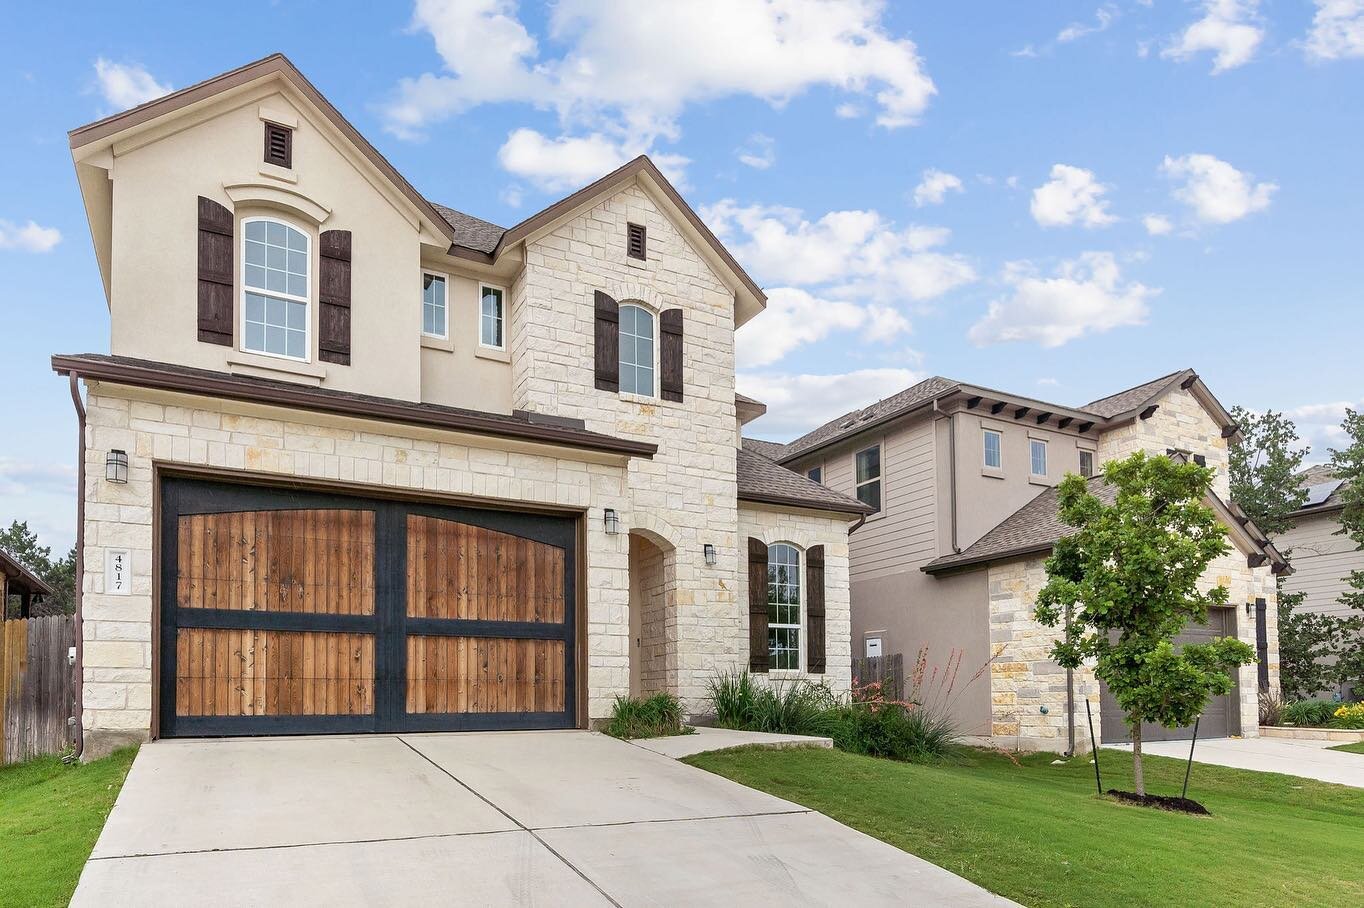 Just listed in Southwest Austin&rsquo;s highly desirable Circle C location! $949,000.

Beautiful 4-bedroom greenbelt home in Circle C Ranch's Grey Rock Ridge subdivision. Interior is immaculate, with wood-look tile floors, high ceilings, and recessed